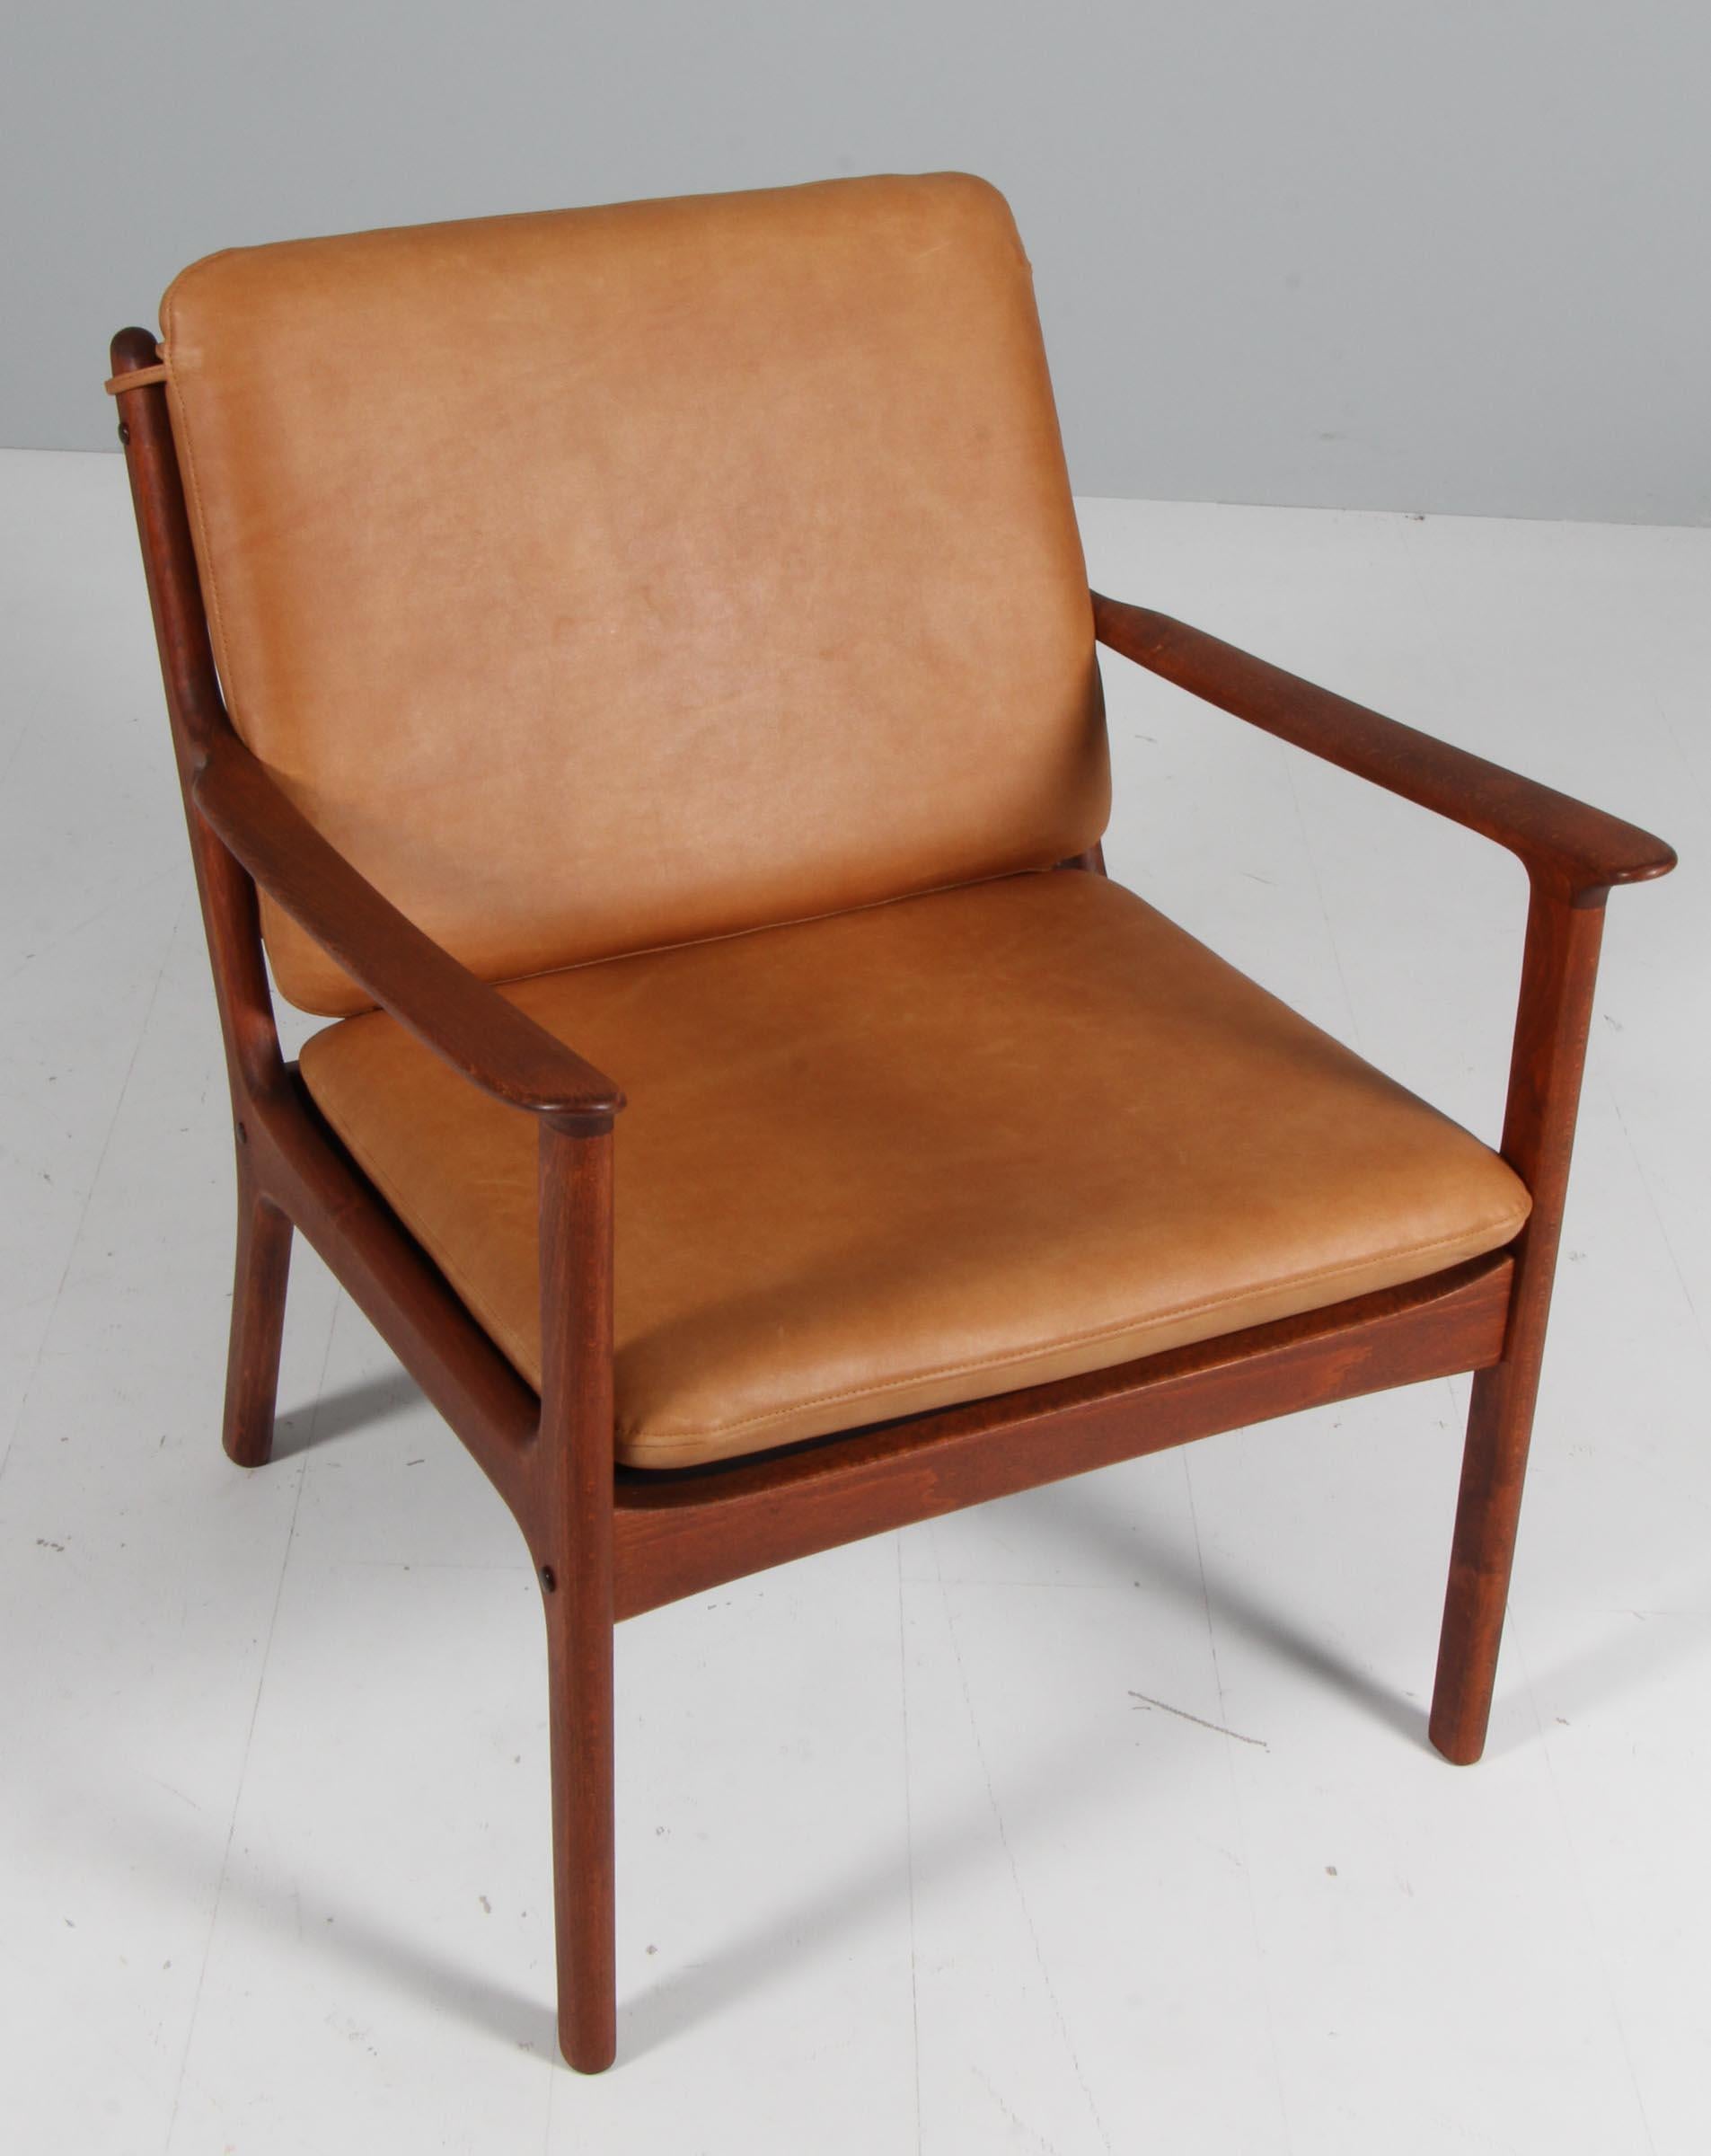 Ole Wanscher lounge chair new upholstered in vintage cognac aniline leather. 

Made of solid stained beech.

Model PJ 112, made by Poul Jeppesen.

